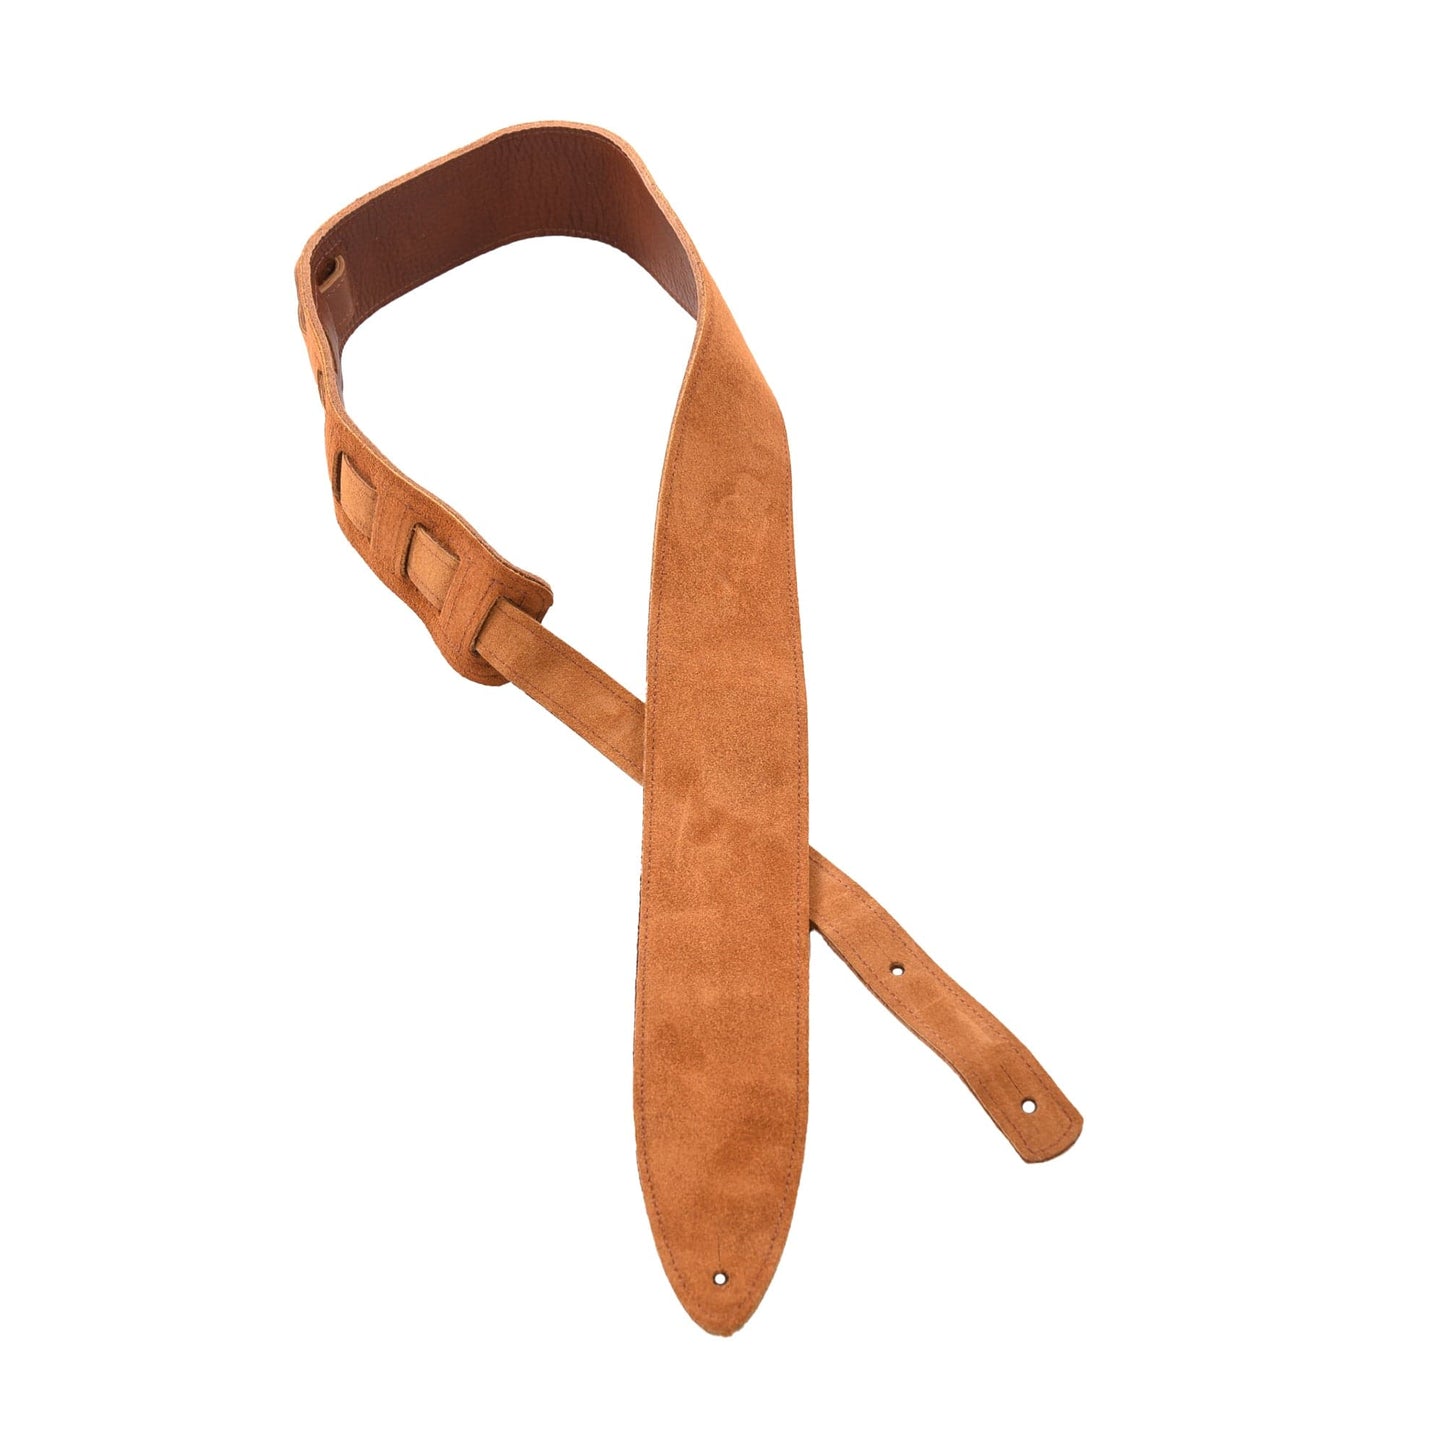 Souldier Rustic Pebble Leather Torpedo Guitar Strap Brown Accessories / Straps